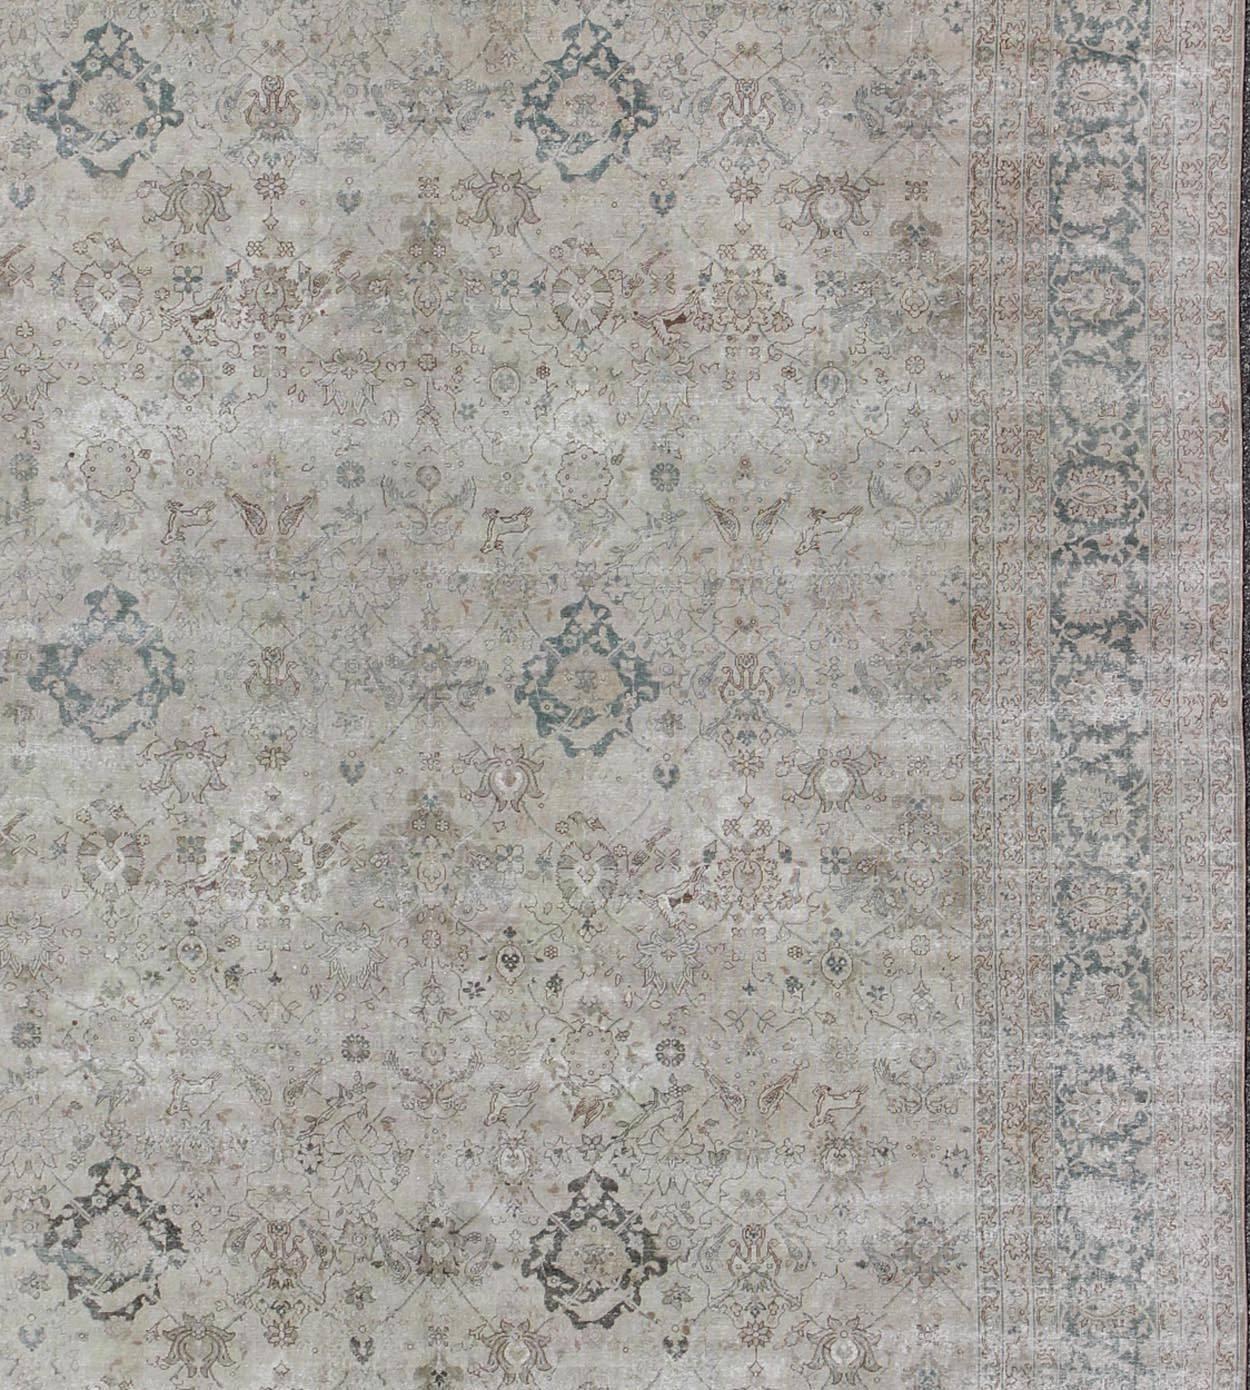 Oushak All-Over Design Antique Turkish Sivas Rug in Gray, Ivory, and Blue Tones